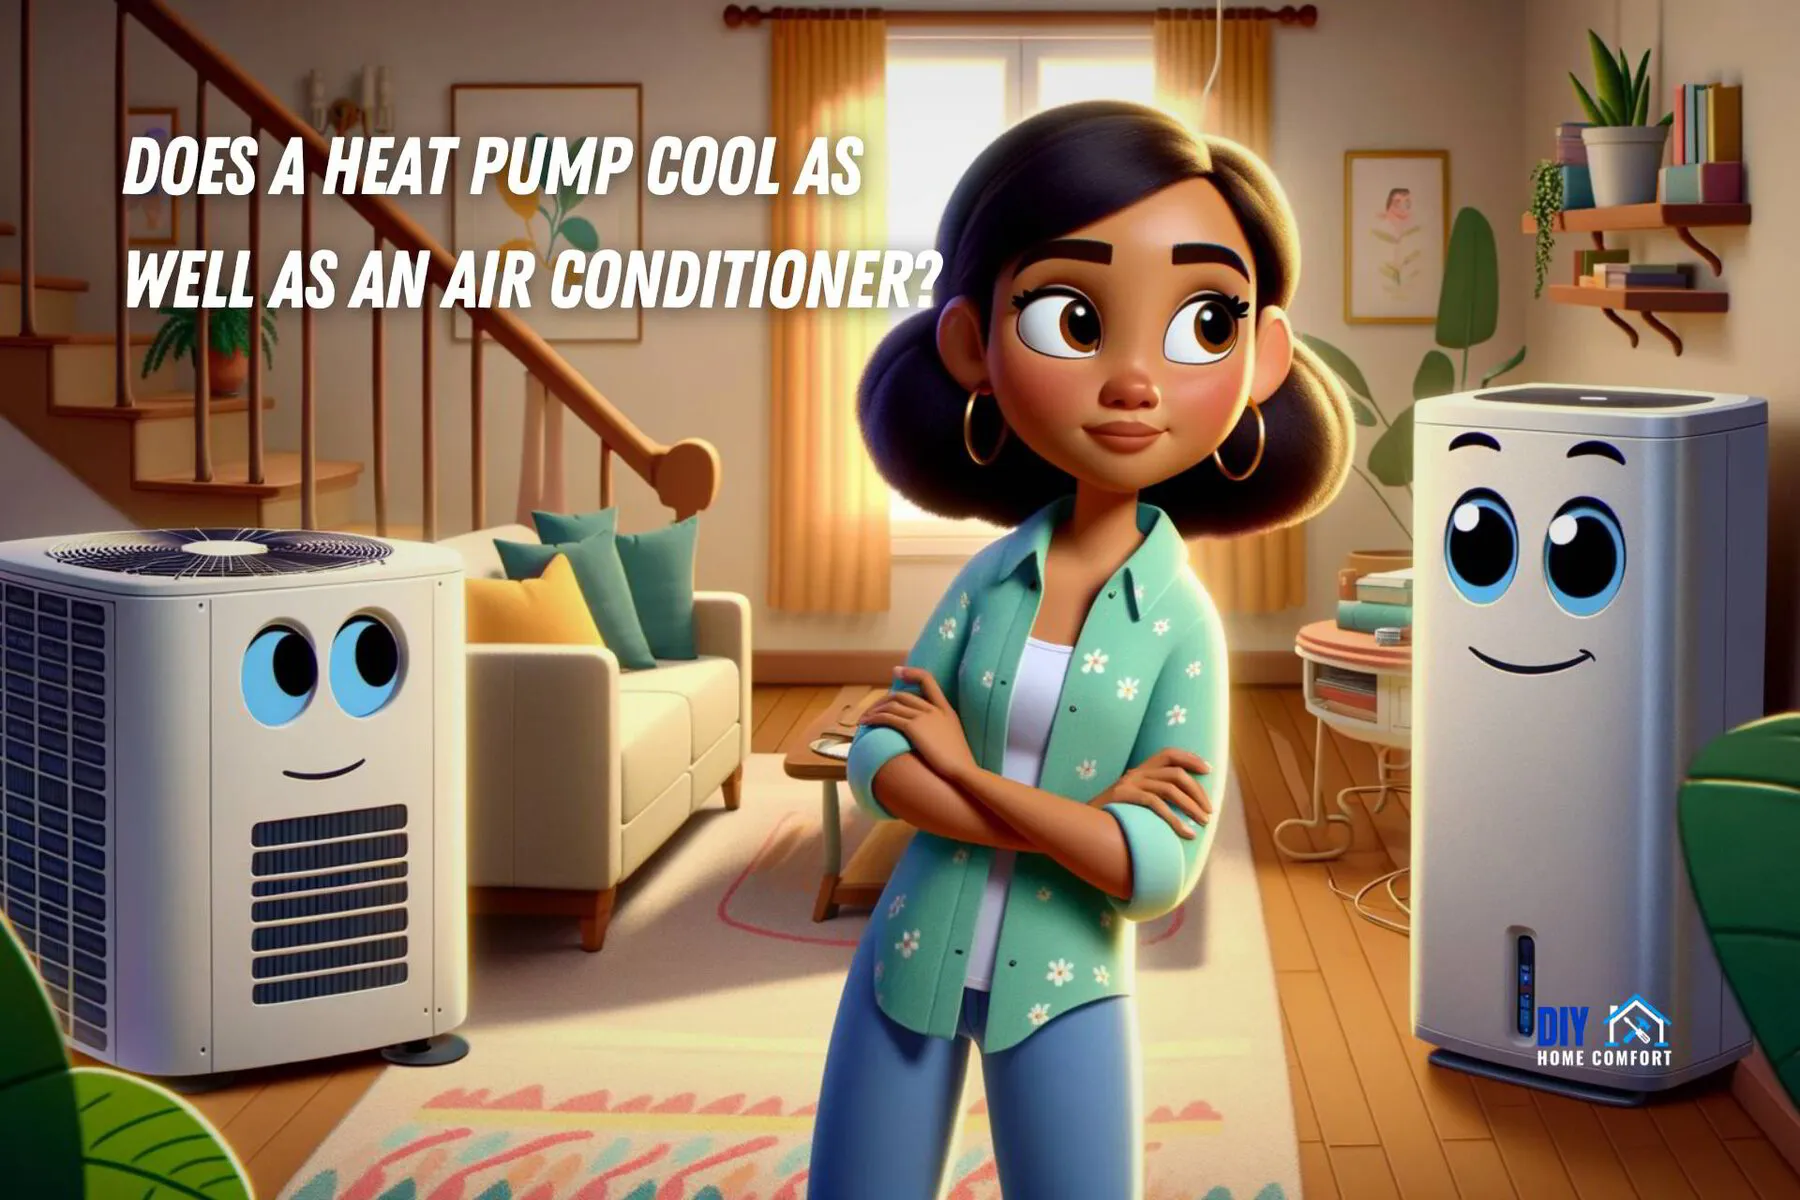 Does a Heat Pump Cool As Well As An Air Conditioner? | DIY Home Comfort